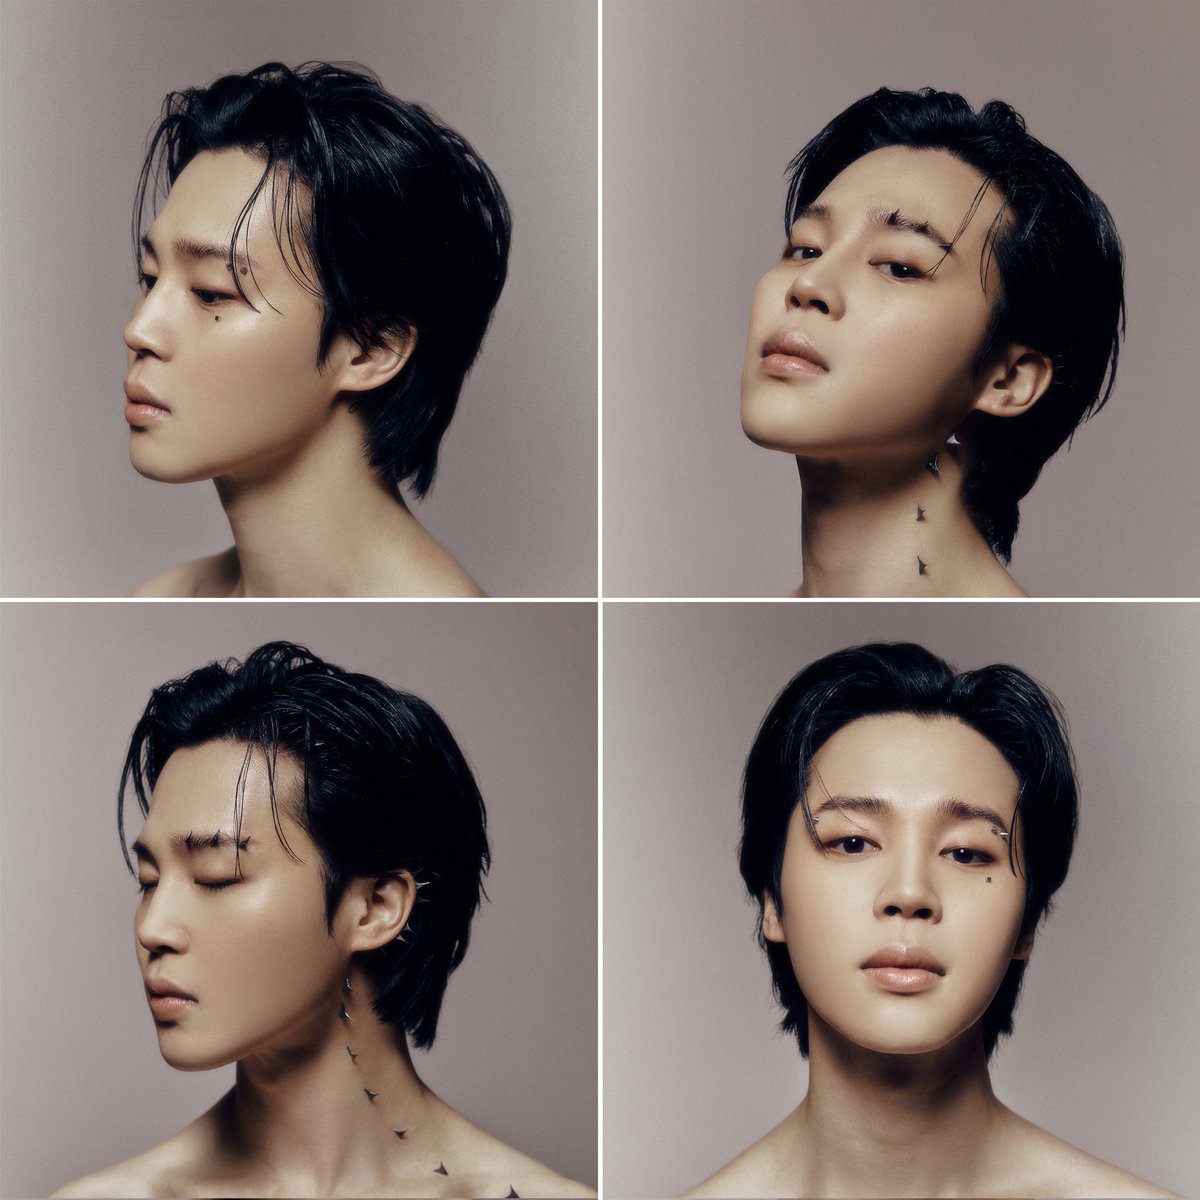 JIMIN CONCEPT PHOTO SOFTWARE
THE JIMIN IS COMING 
#Jimin_FACE_Is_Coming 
#Jimin_Software_Ver 
#FACECONCEPTPHOTOSOFTWARE